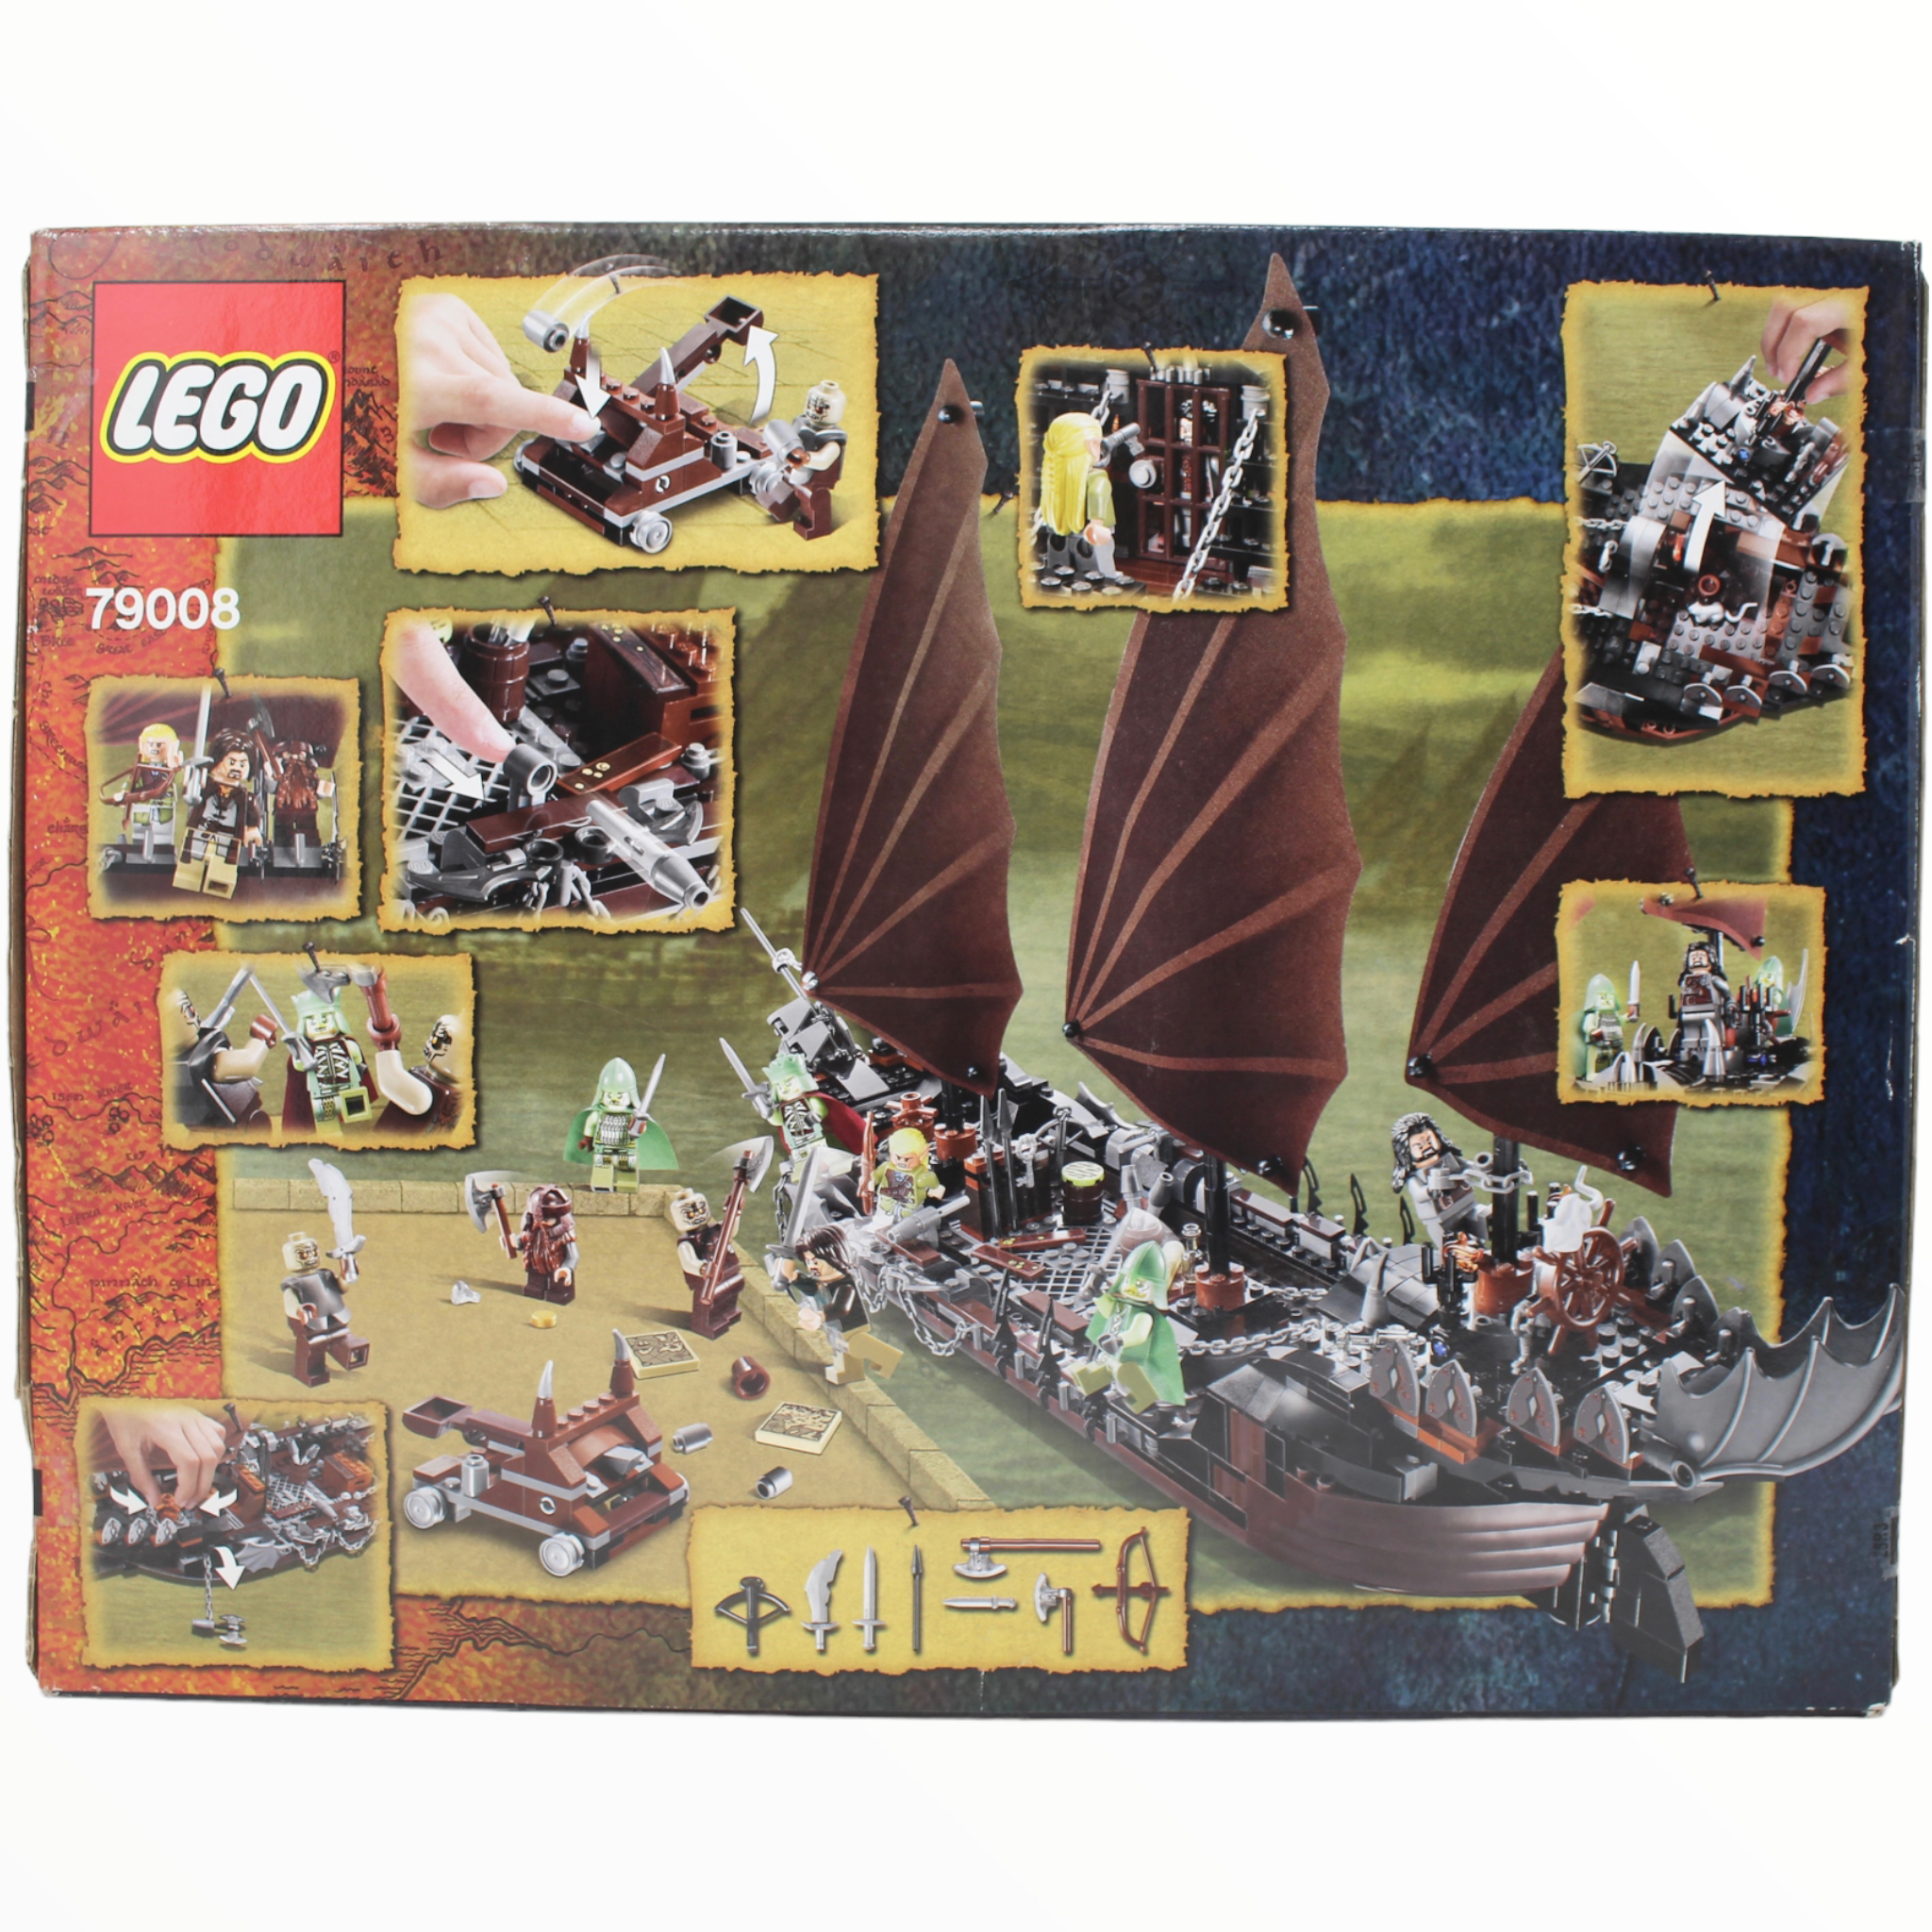 Retired Set 79008 The Lord of the Rings Pirate Ship Ambush